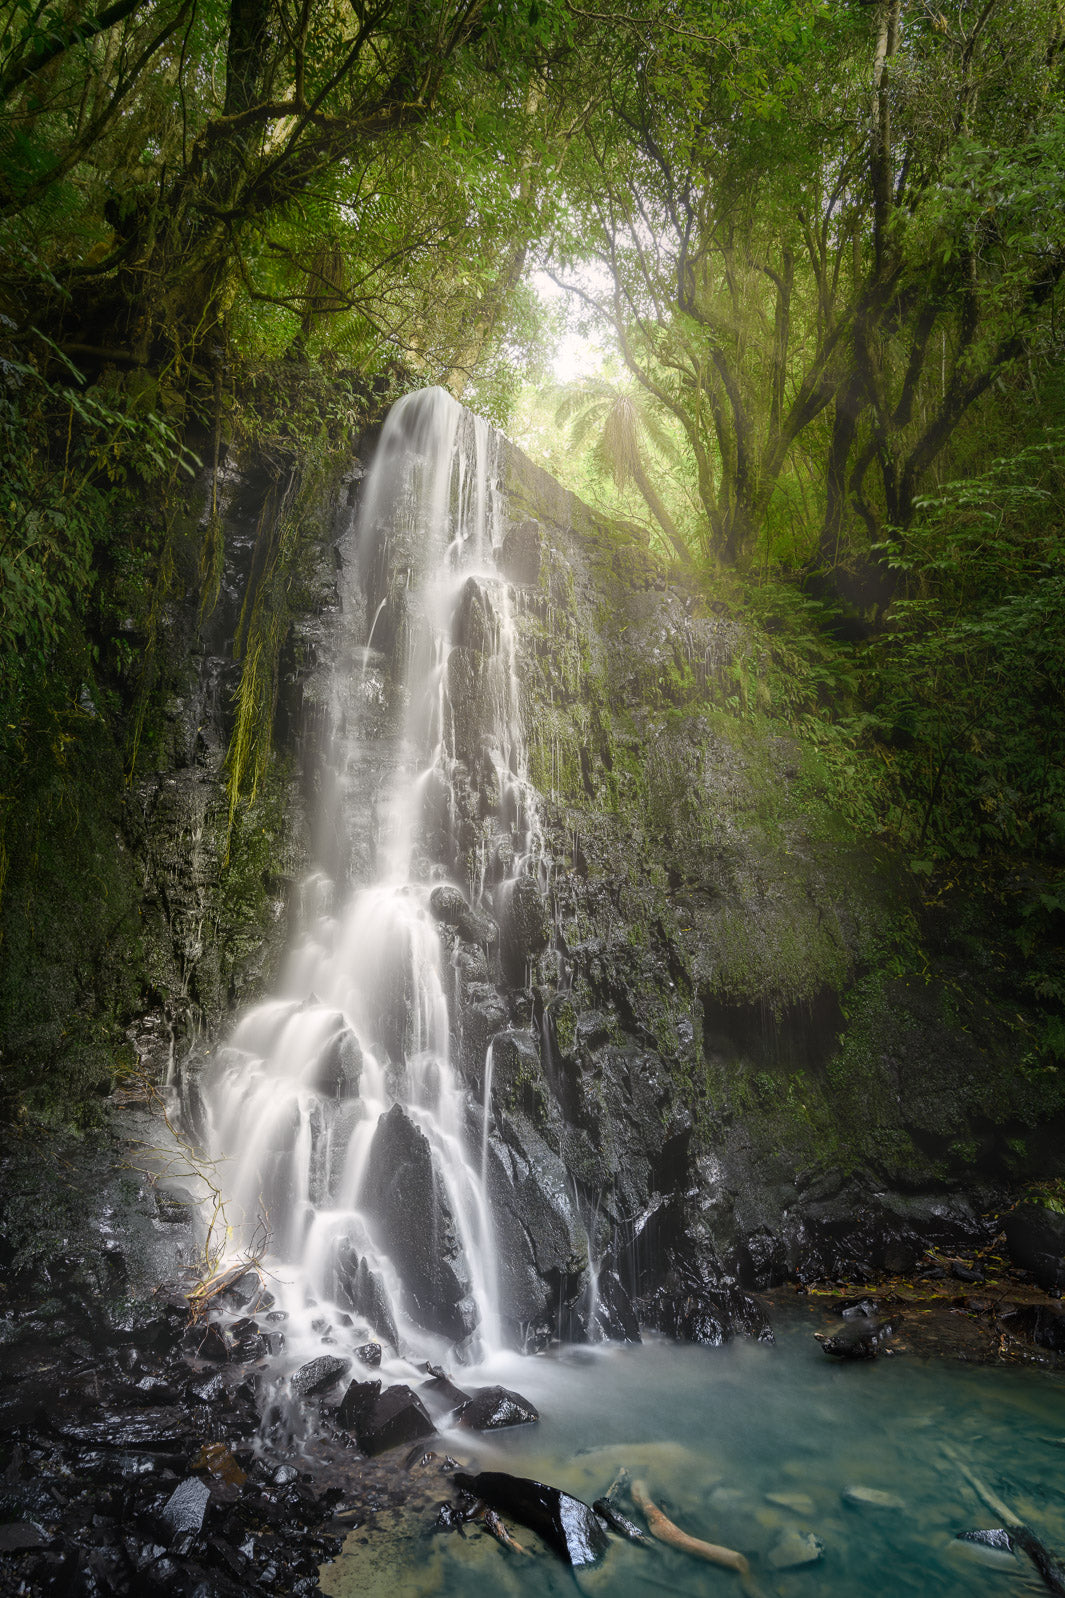 Long exposure photo of Horseshoe Falls waterfall and surrounding trees in Catlins Forest Park